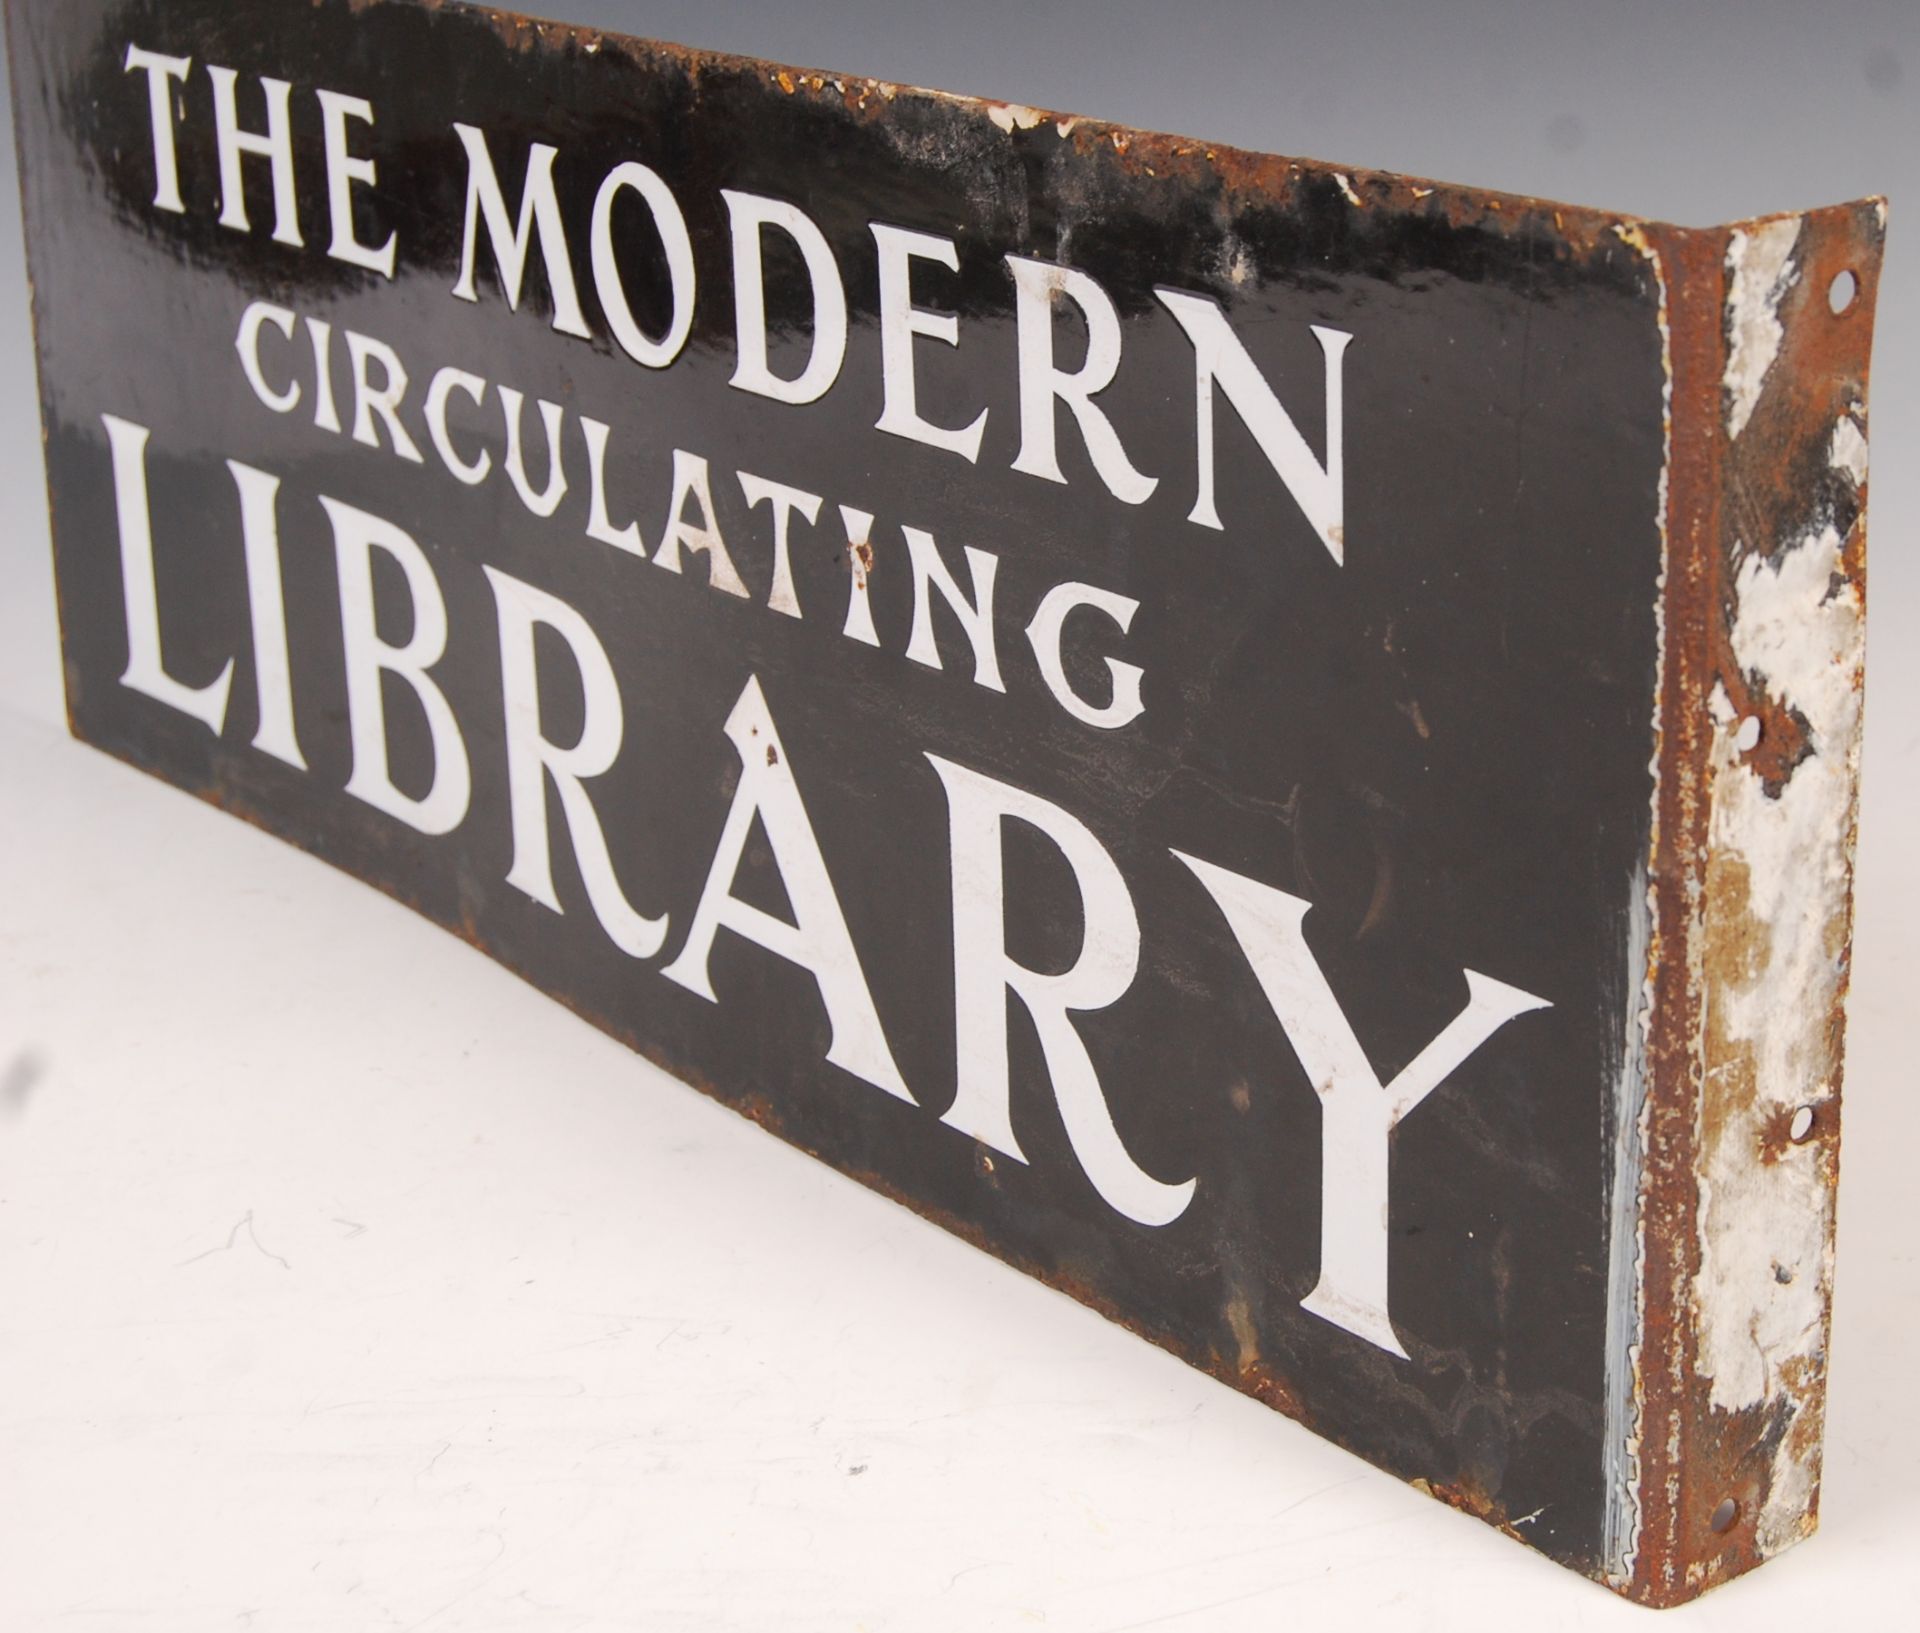 ANTIQUE PORCELAIN ENAMEL SIGN FOR THE MODERN CIRCULATING LIBRARY - Image 3 of 4